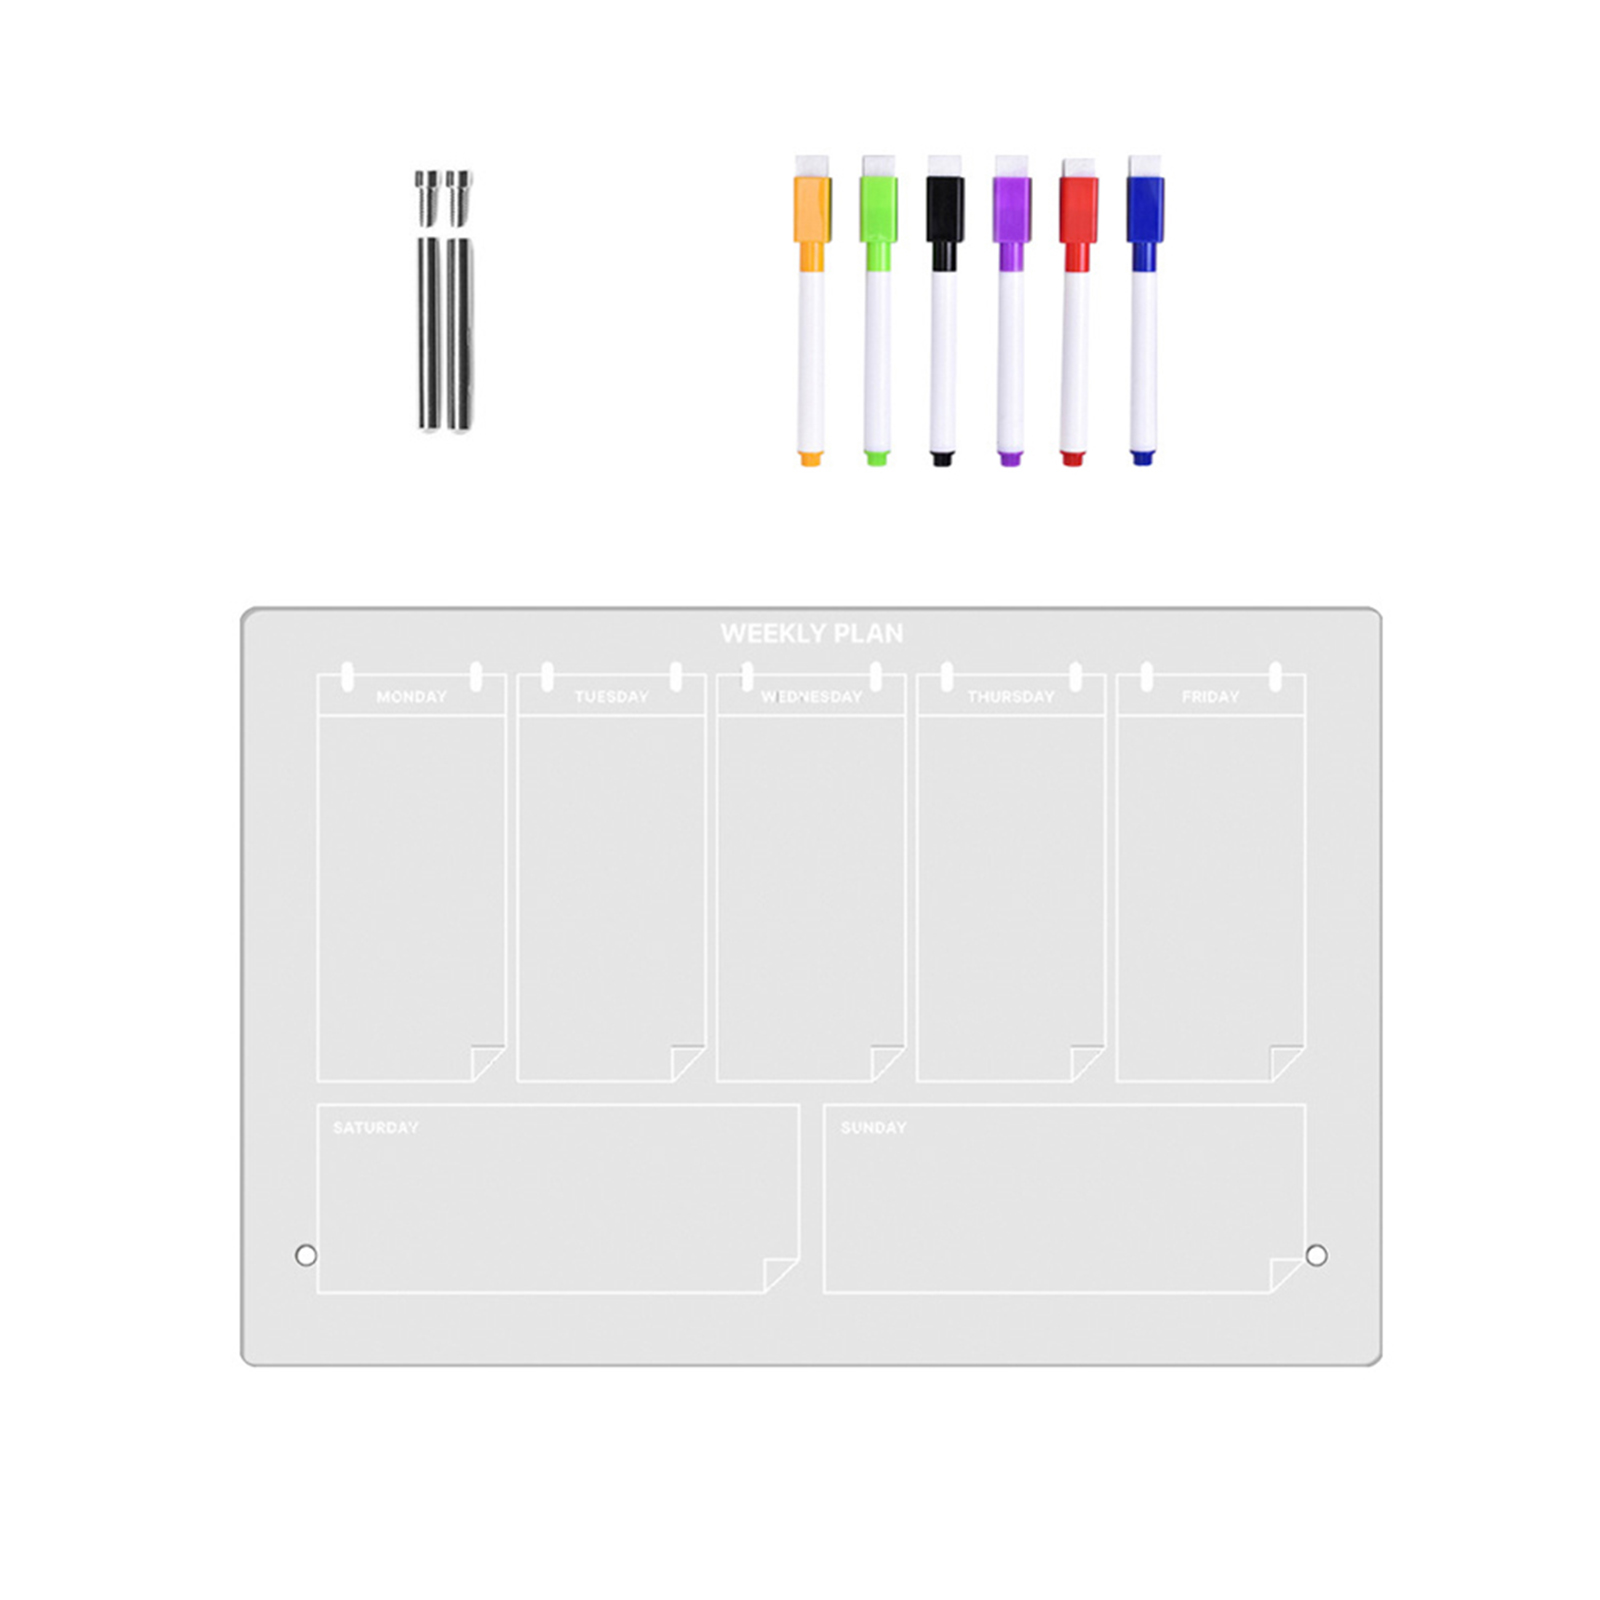 Acrylic Calendar Weekly Planning Board Desktop Clear Memo Note Board Whiteboard With Stand 6 Markers For Office Home School